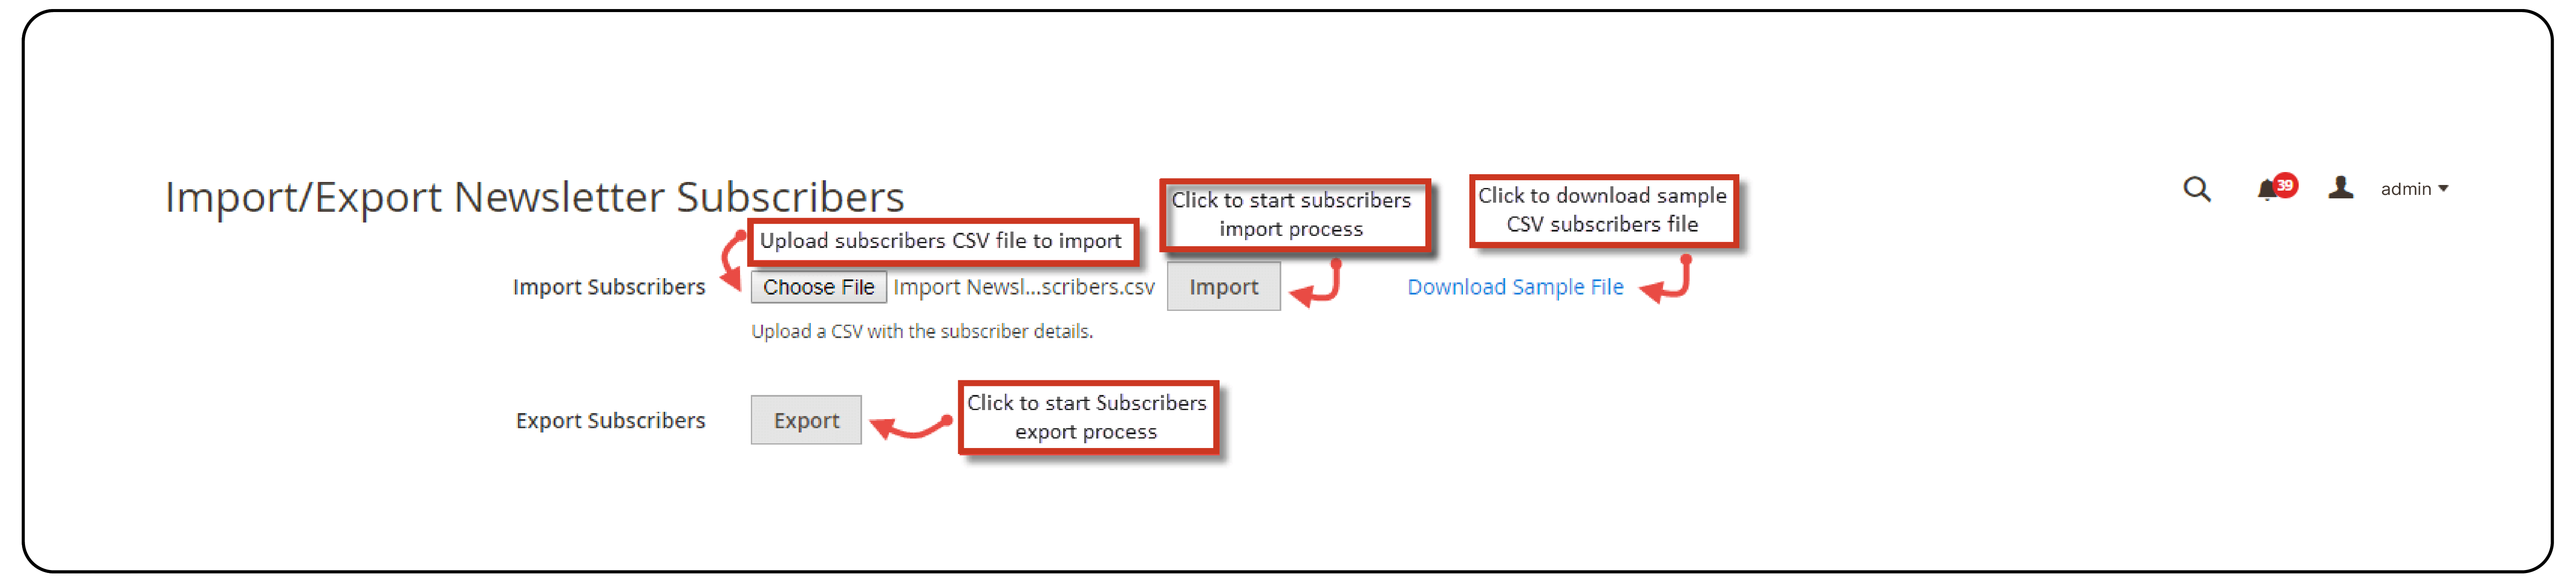 Magento 2 Import Export Newsletter Subscribers Extension - Subscriber info